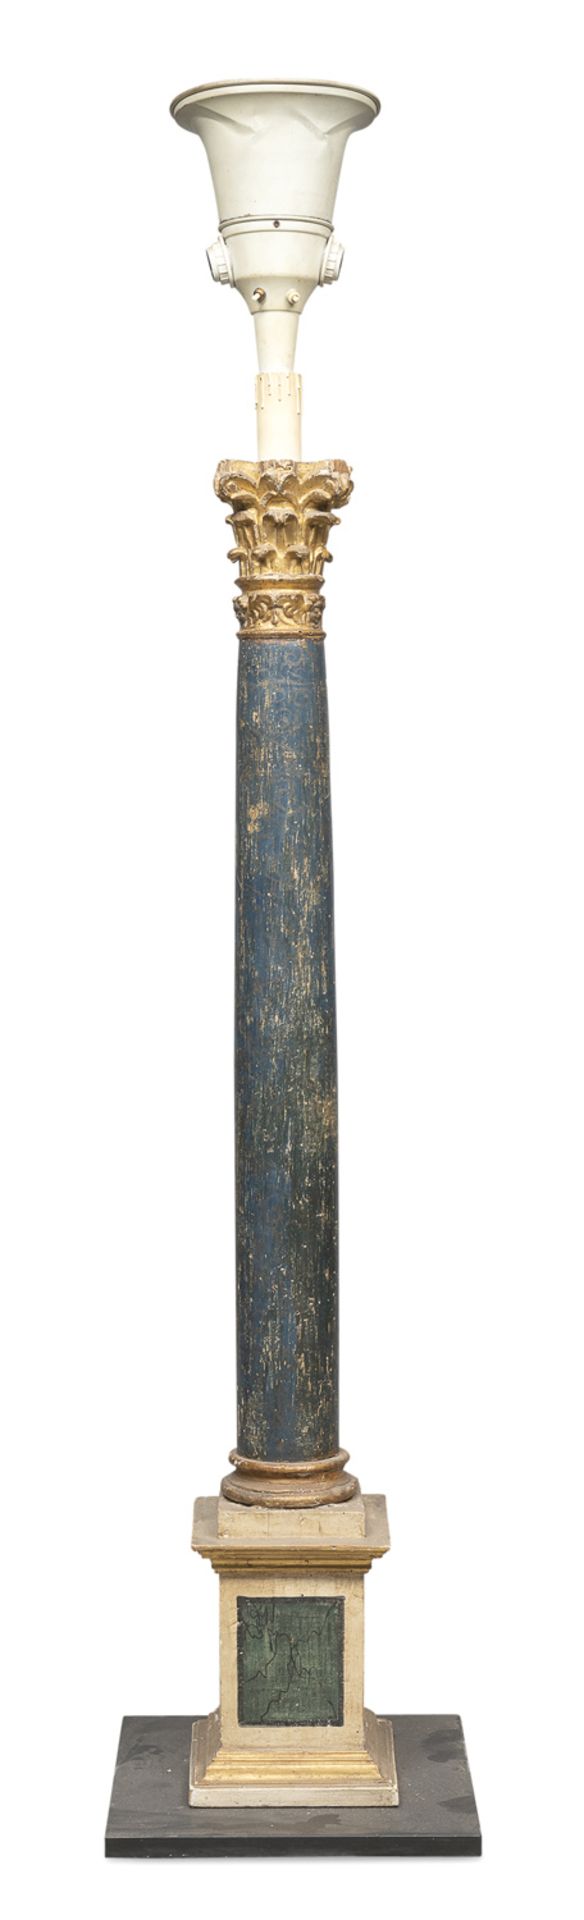 COLUMN IN LACQUERED WOOD MARCHE 18TH CENTURY